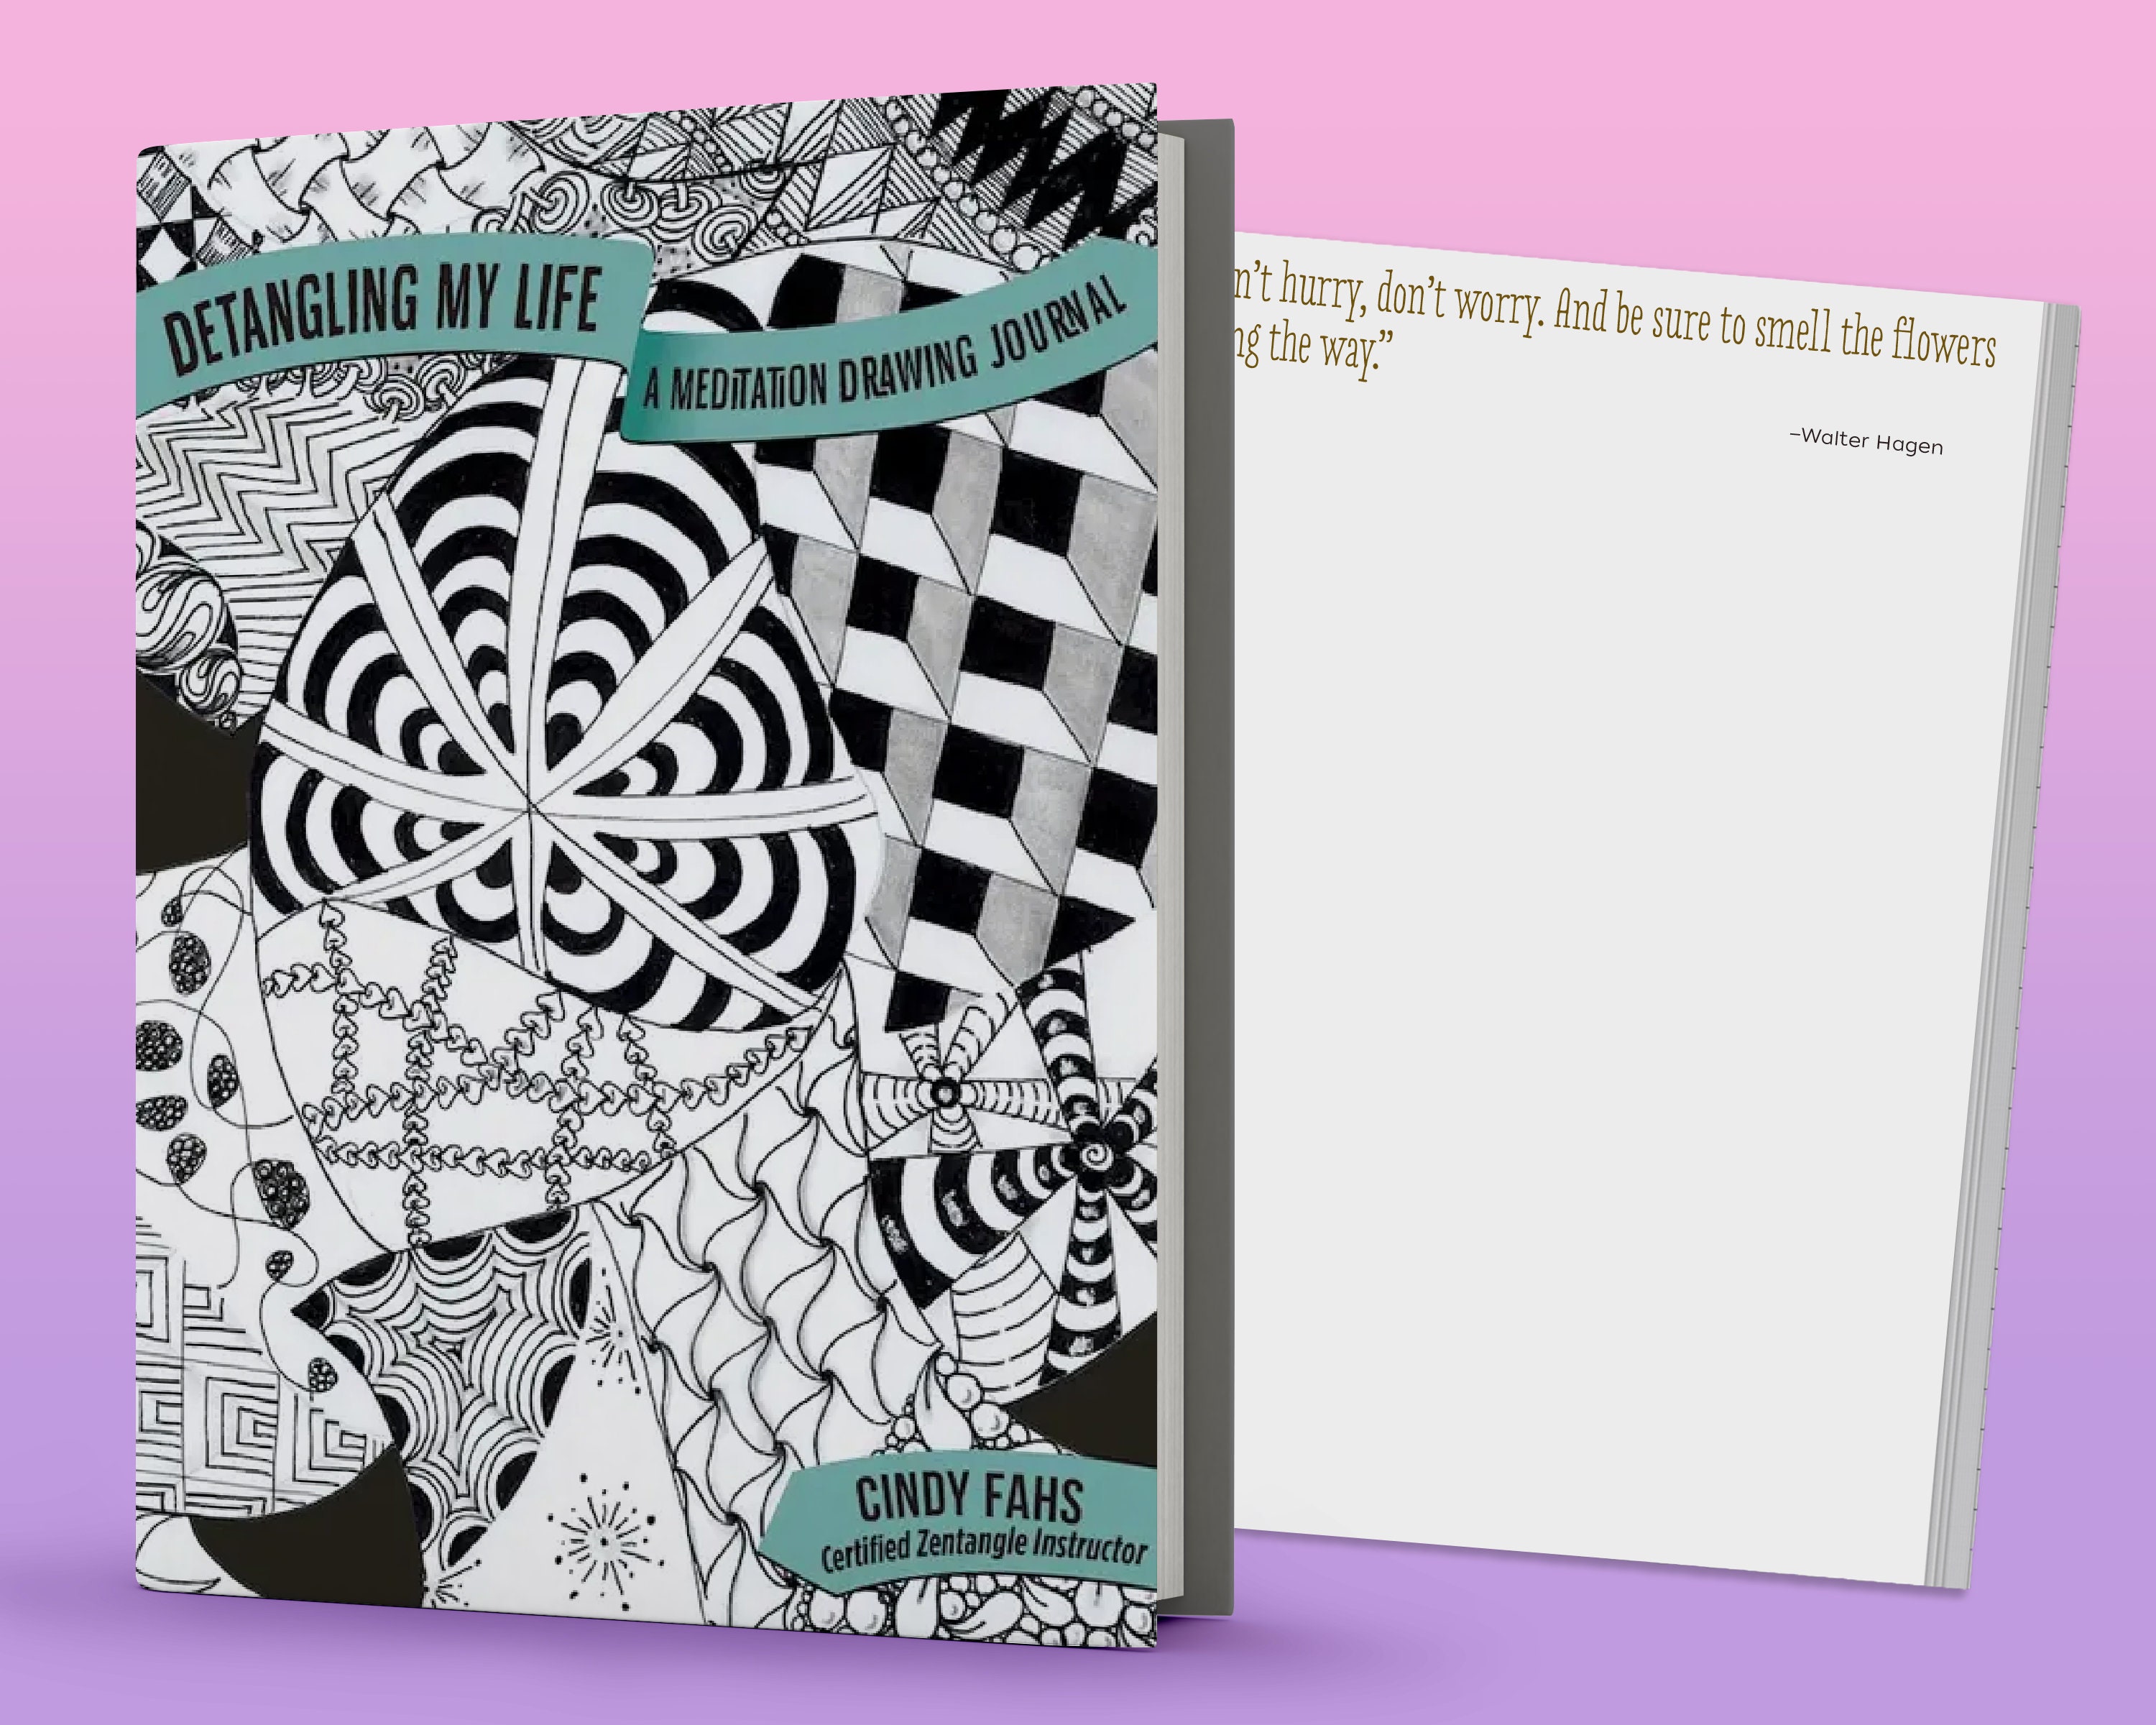 Zentangle - a method of meditation and relaxation from America